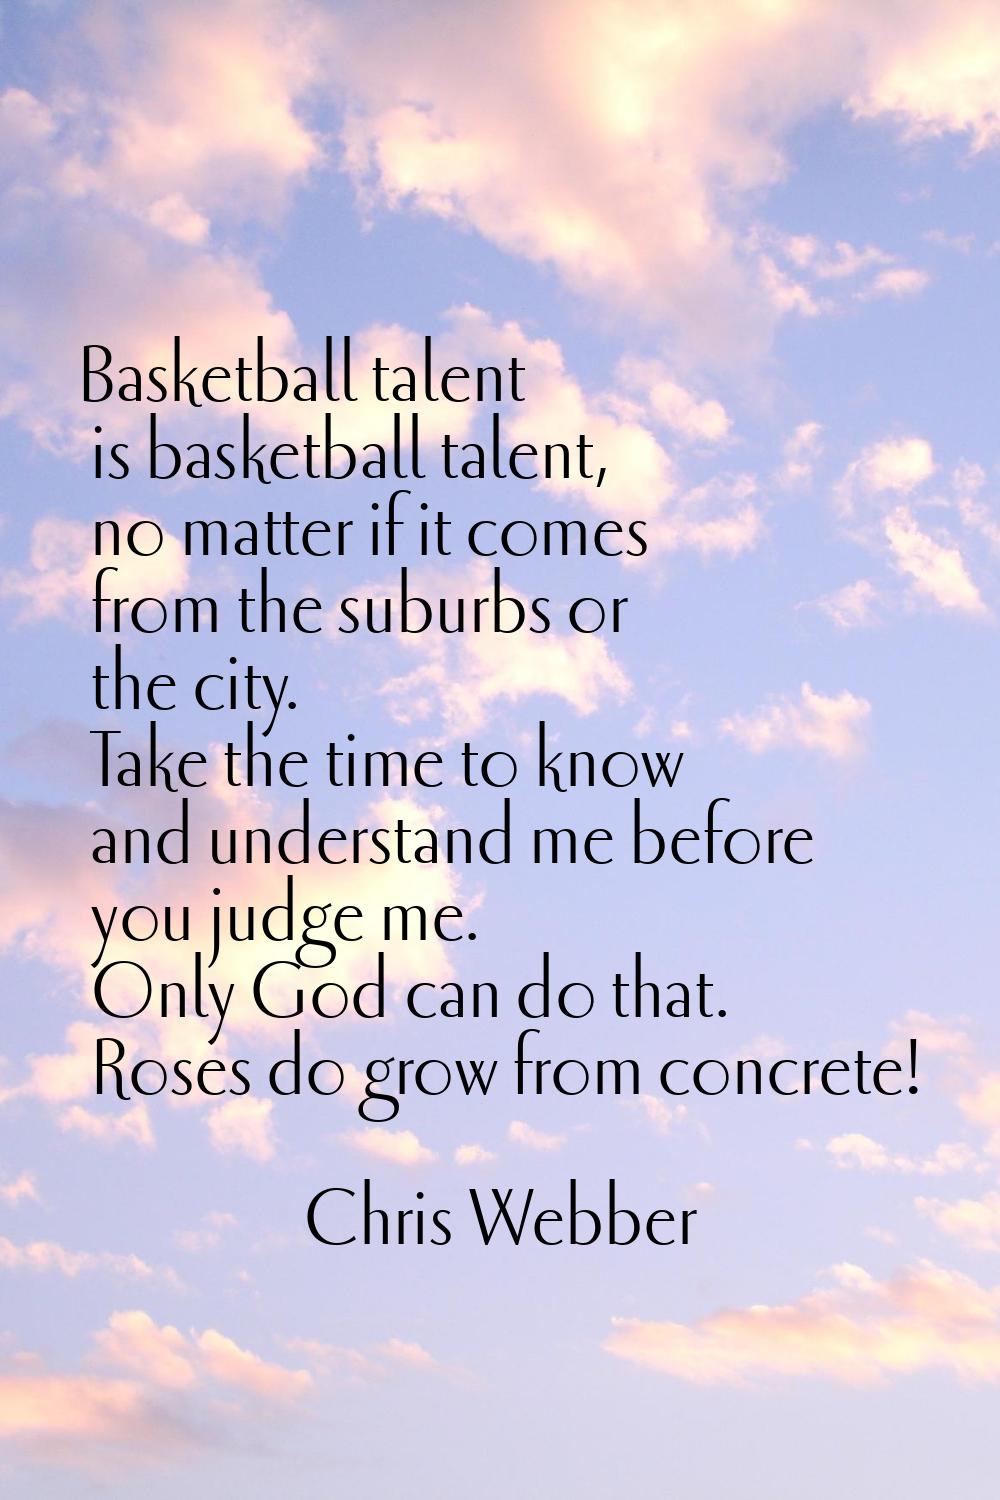 Basketball talent is basketball talent, no matter if it comes from the suburbs or the city. Take th